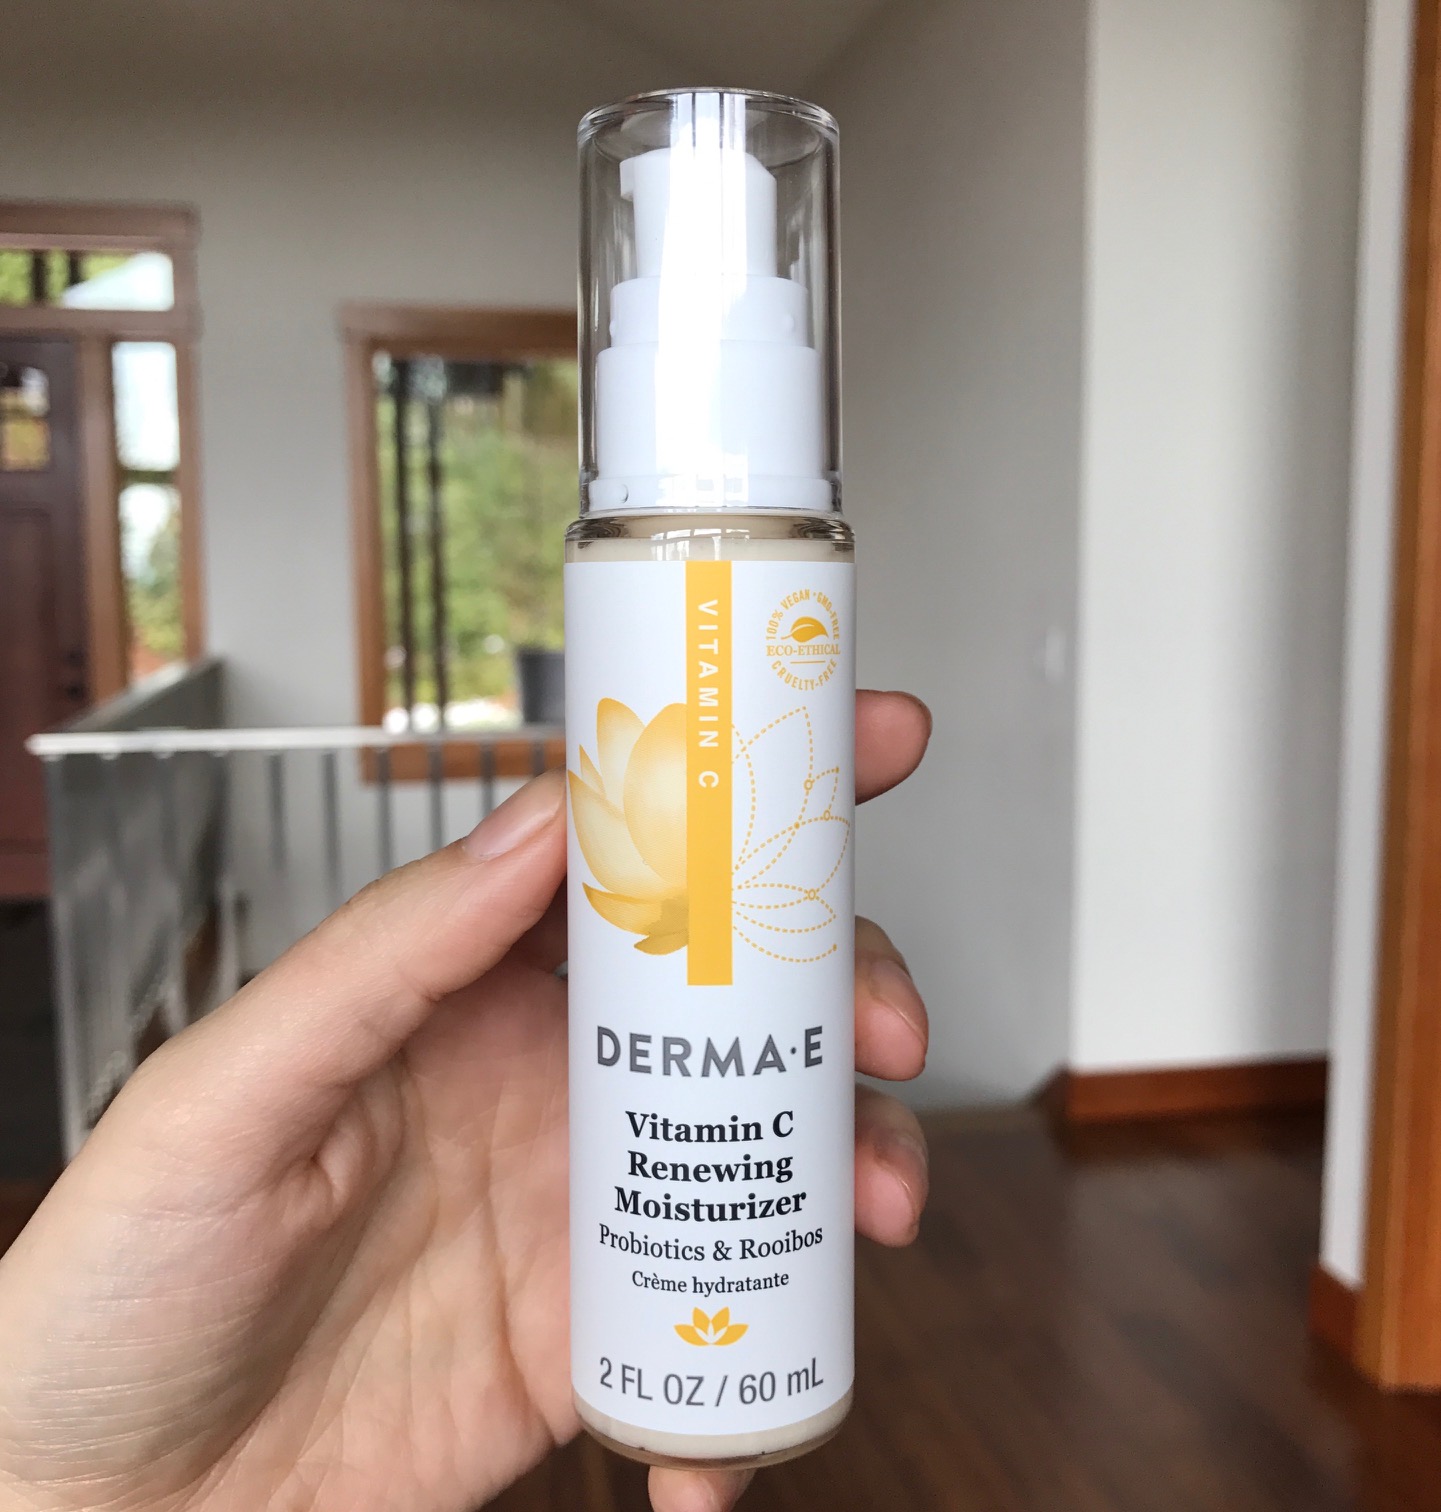 Derma E Vitamin C Collection Review Giveaway! - Vegan Beauty Review | Vegan and Cruelty-Free Beauty, Fashion, Food, and Lifestyle : Vegan Beauty Review | Vegan and Cruelty-Free Beauty, Fashion, Food,